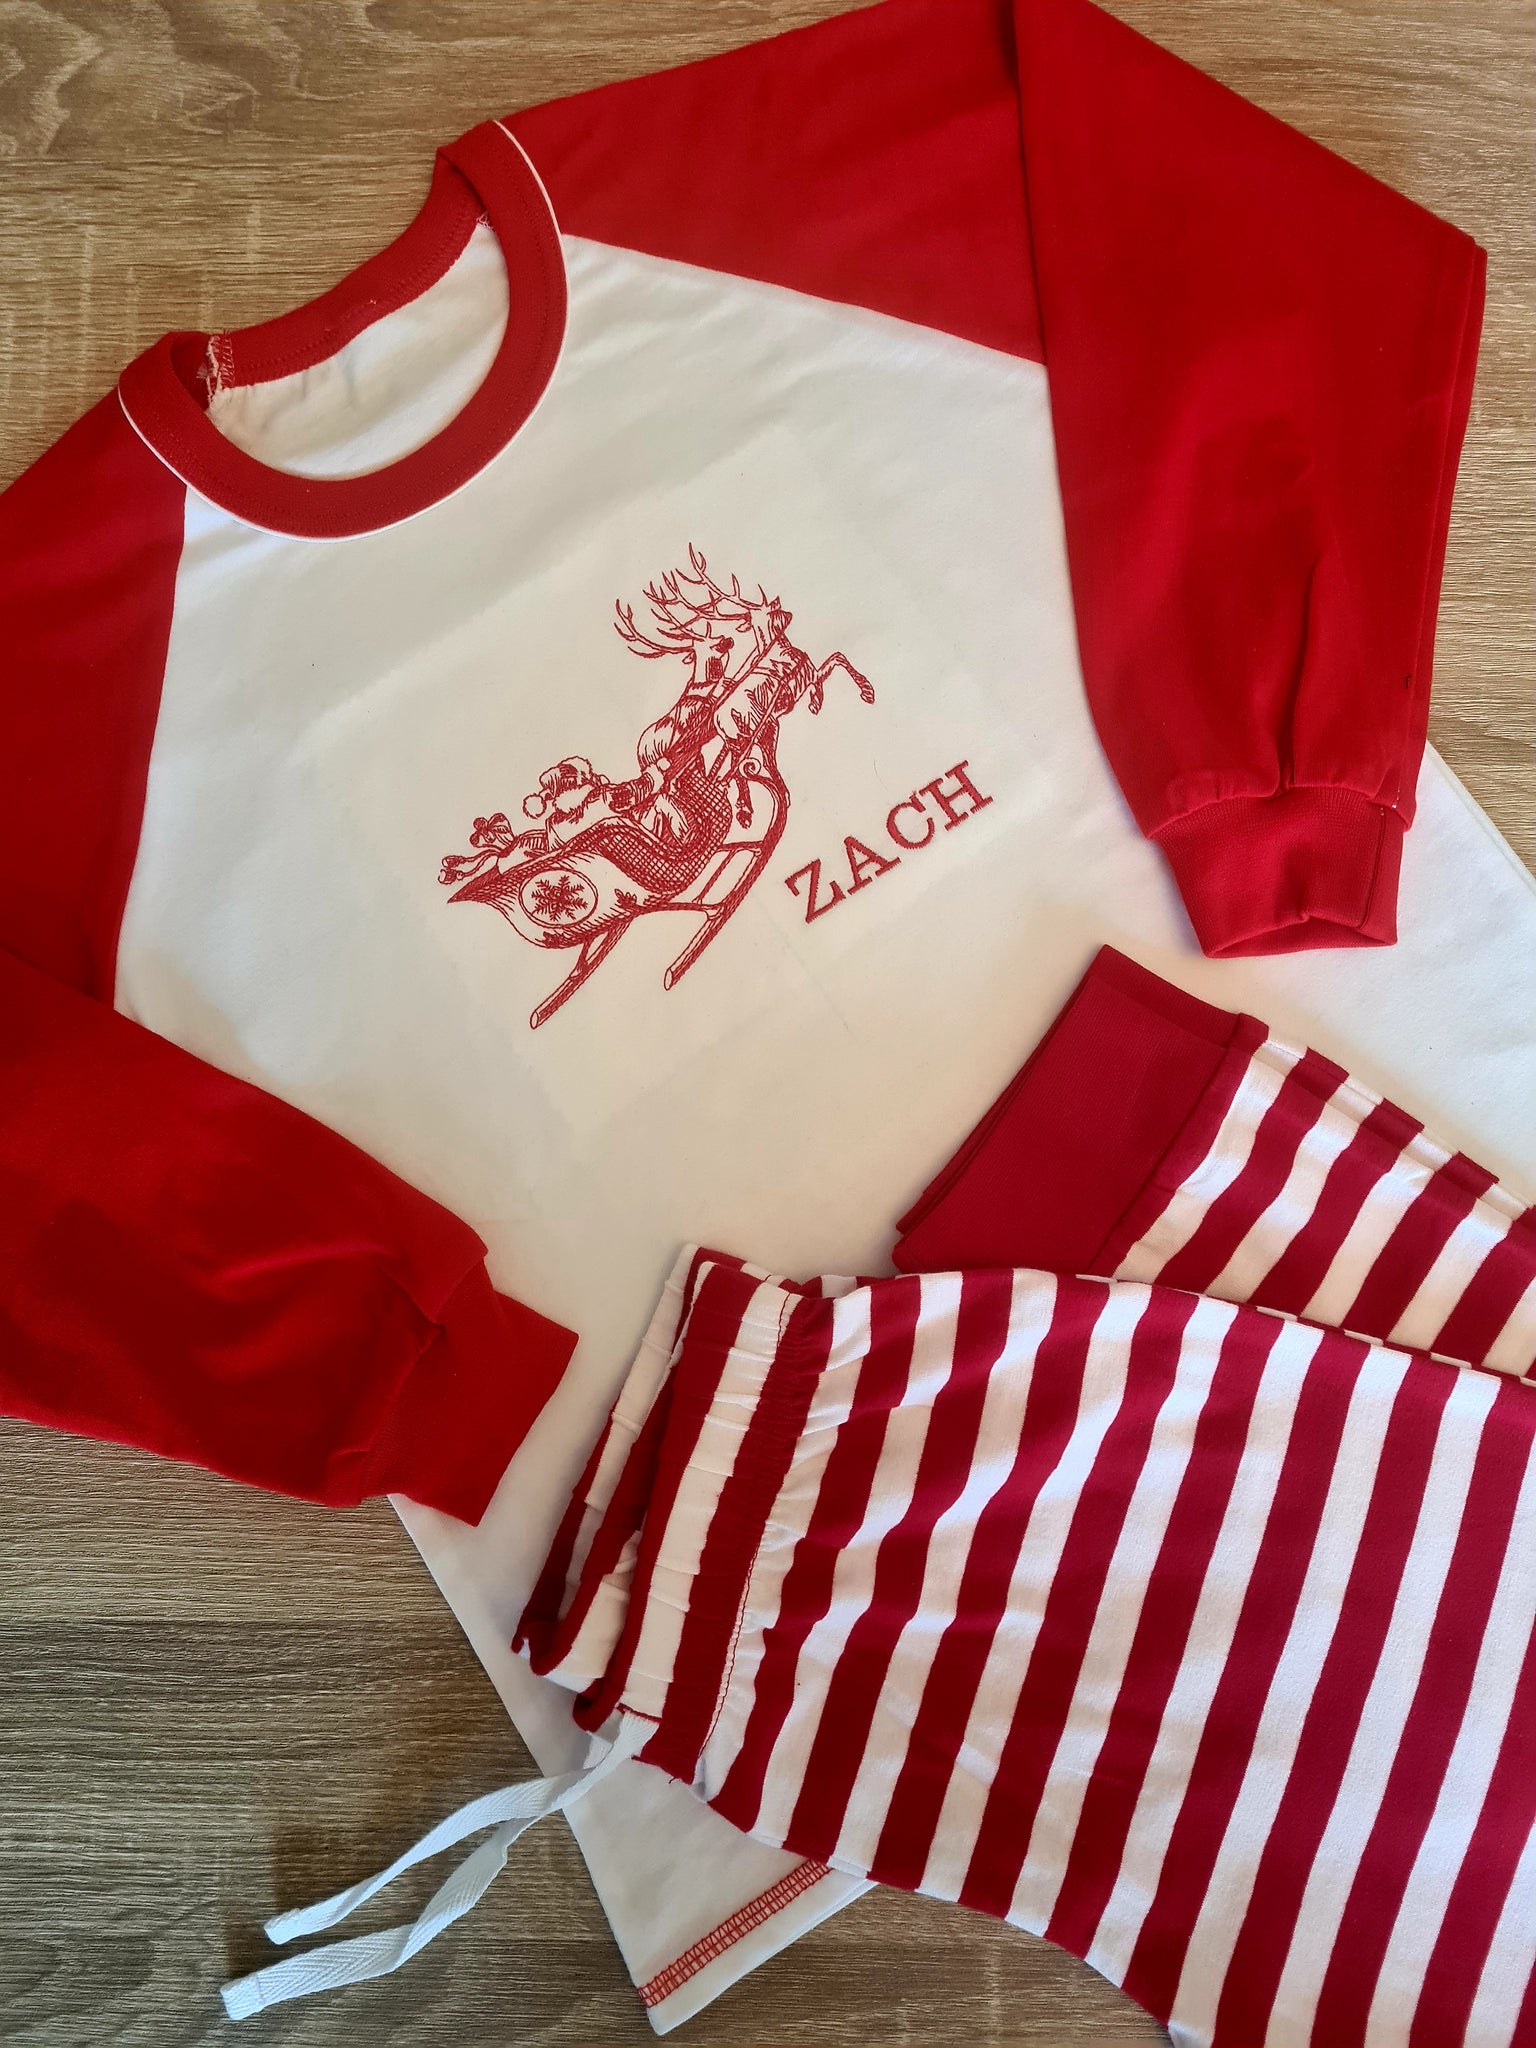 Personalised Christmas Pyjamas for Children and Adults White and Red